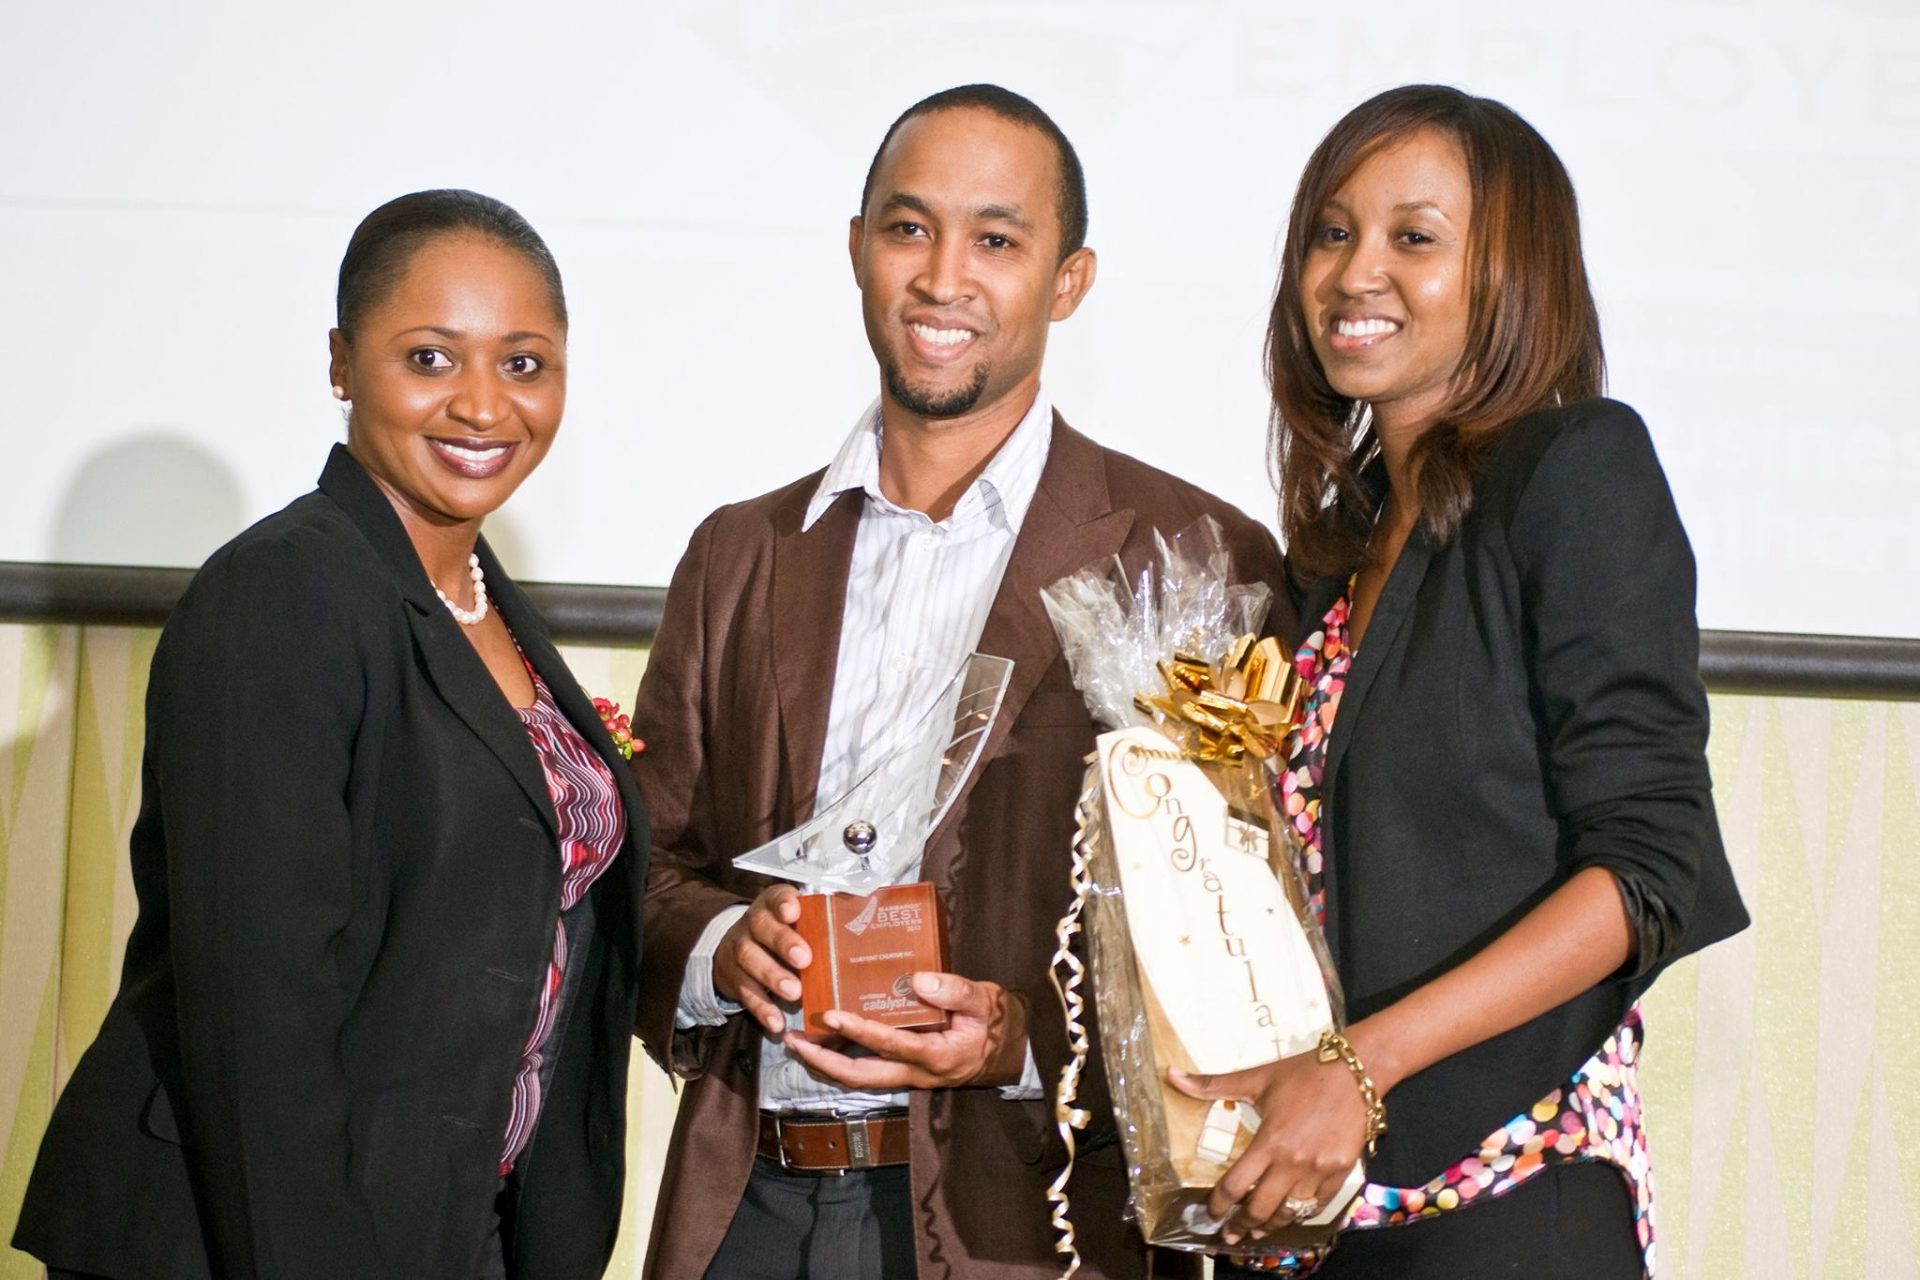 Winner of the Small Business Category 2012 - Blueprint Creative